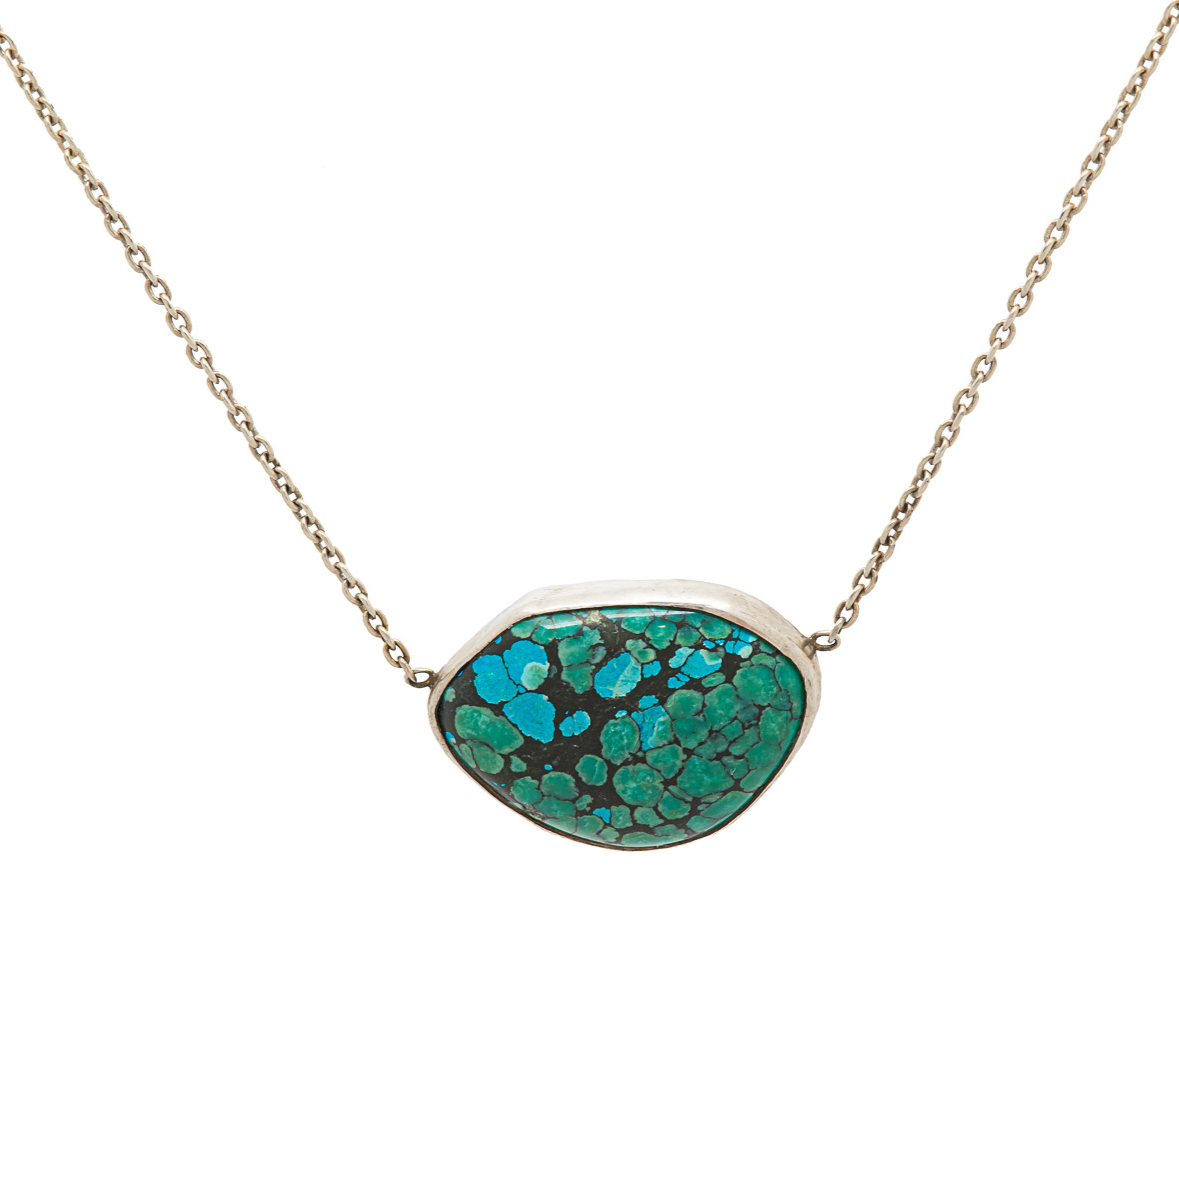 “Lily pad” Turquoise necklace